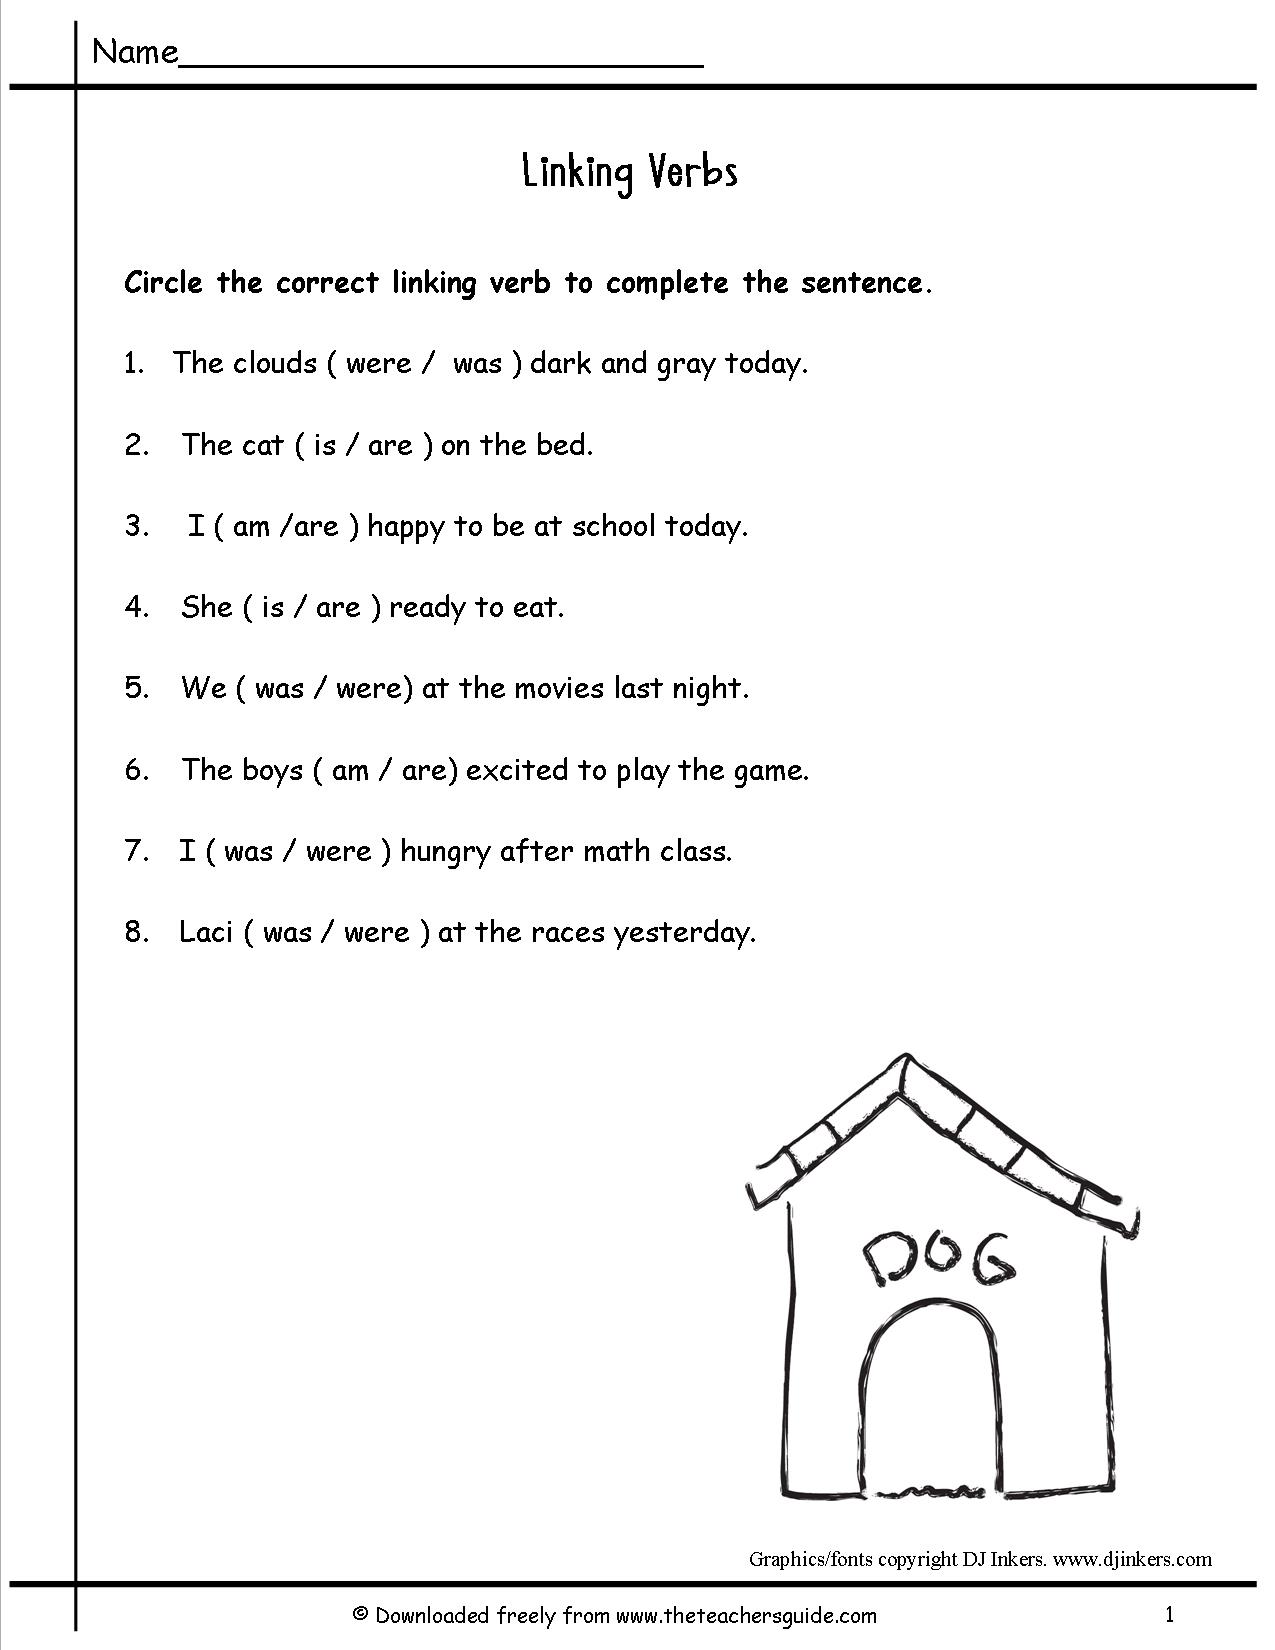 action-and-linking-verbs-worksheet-pdf